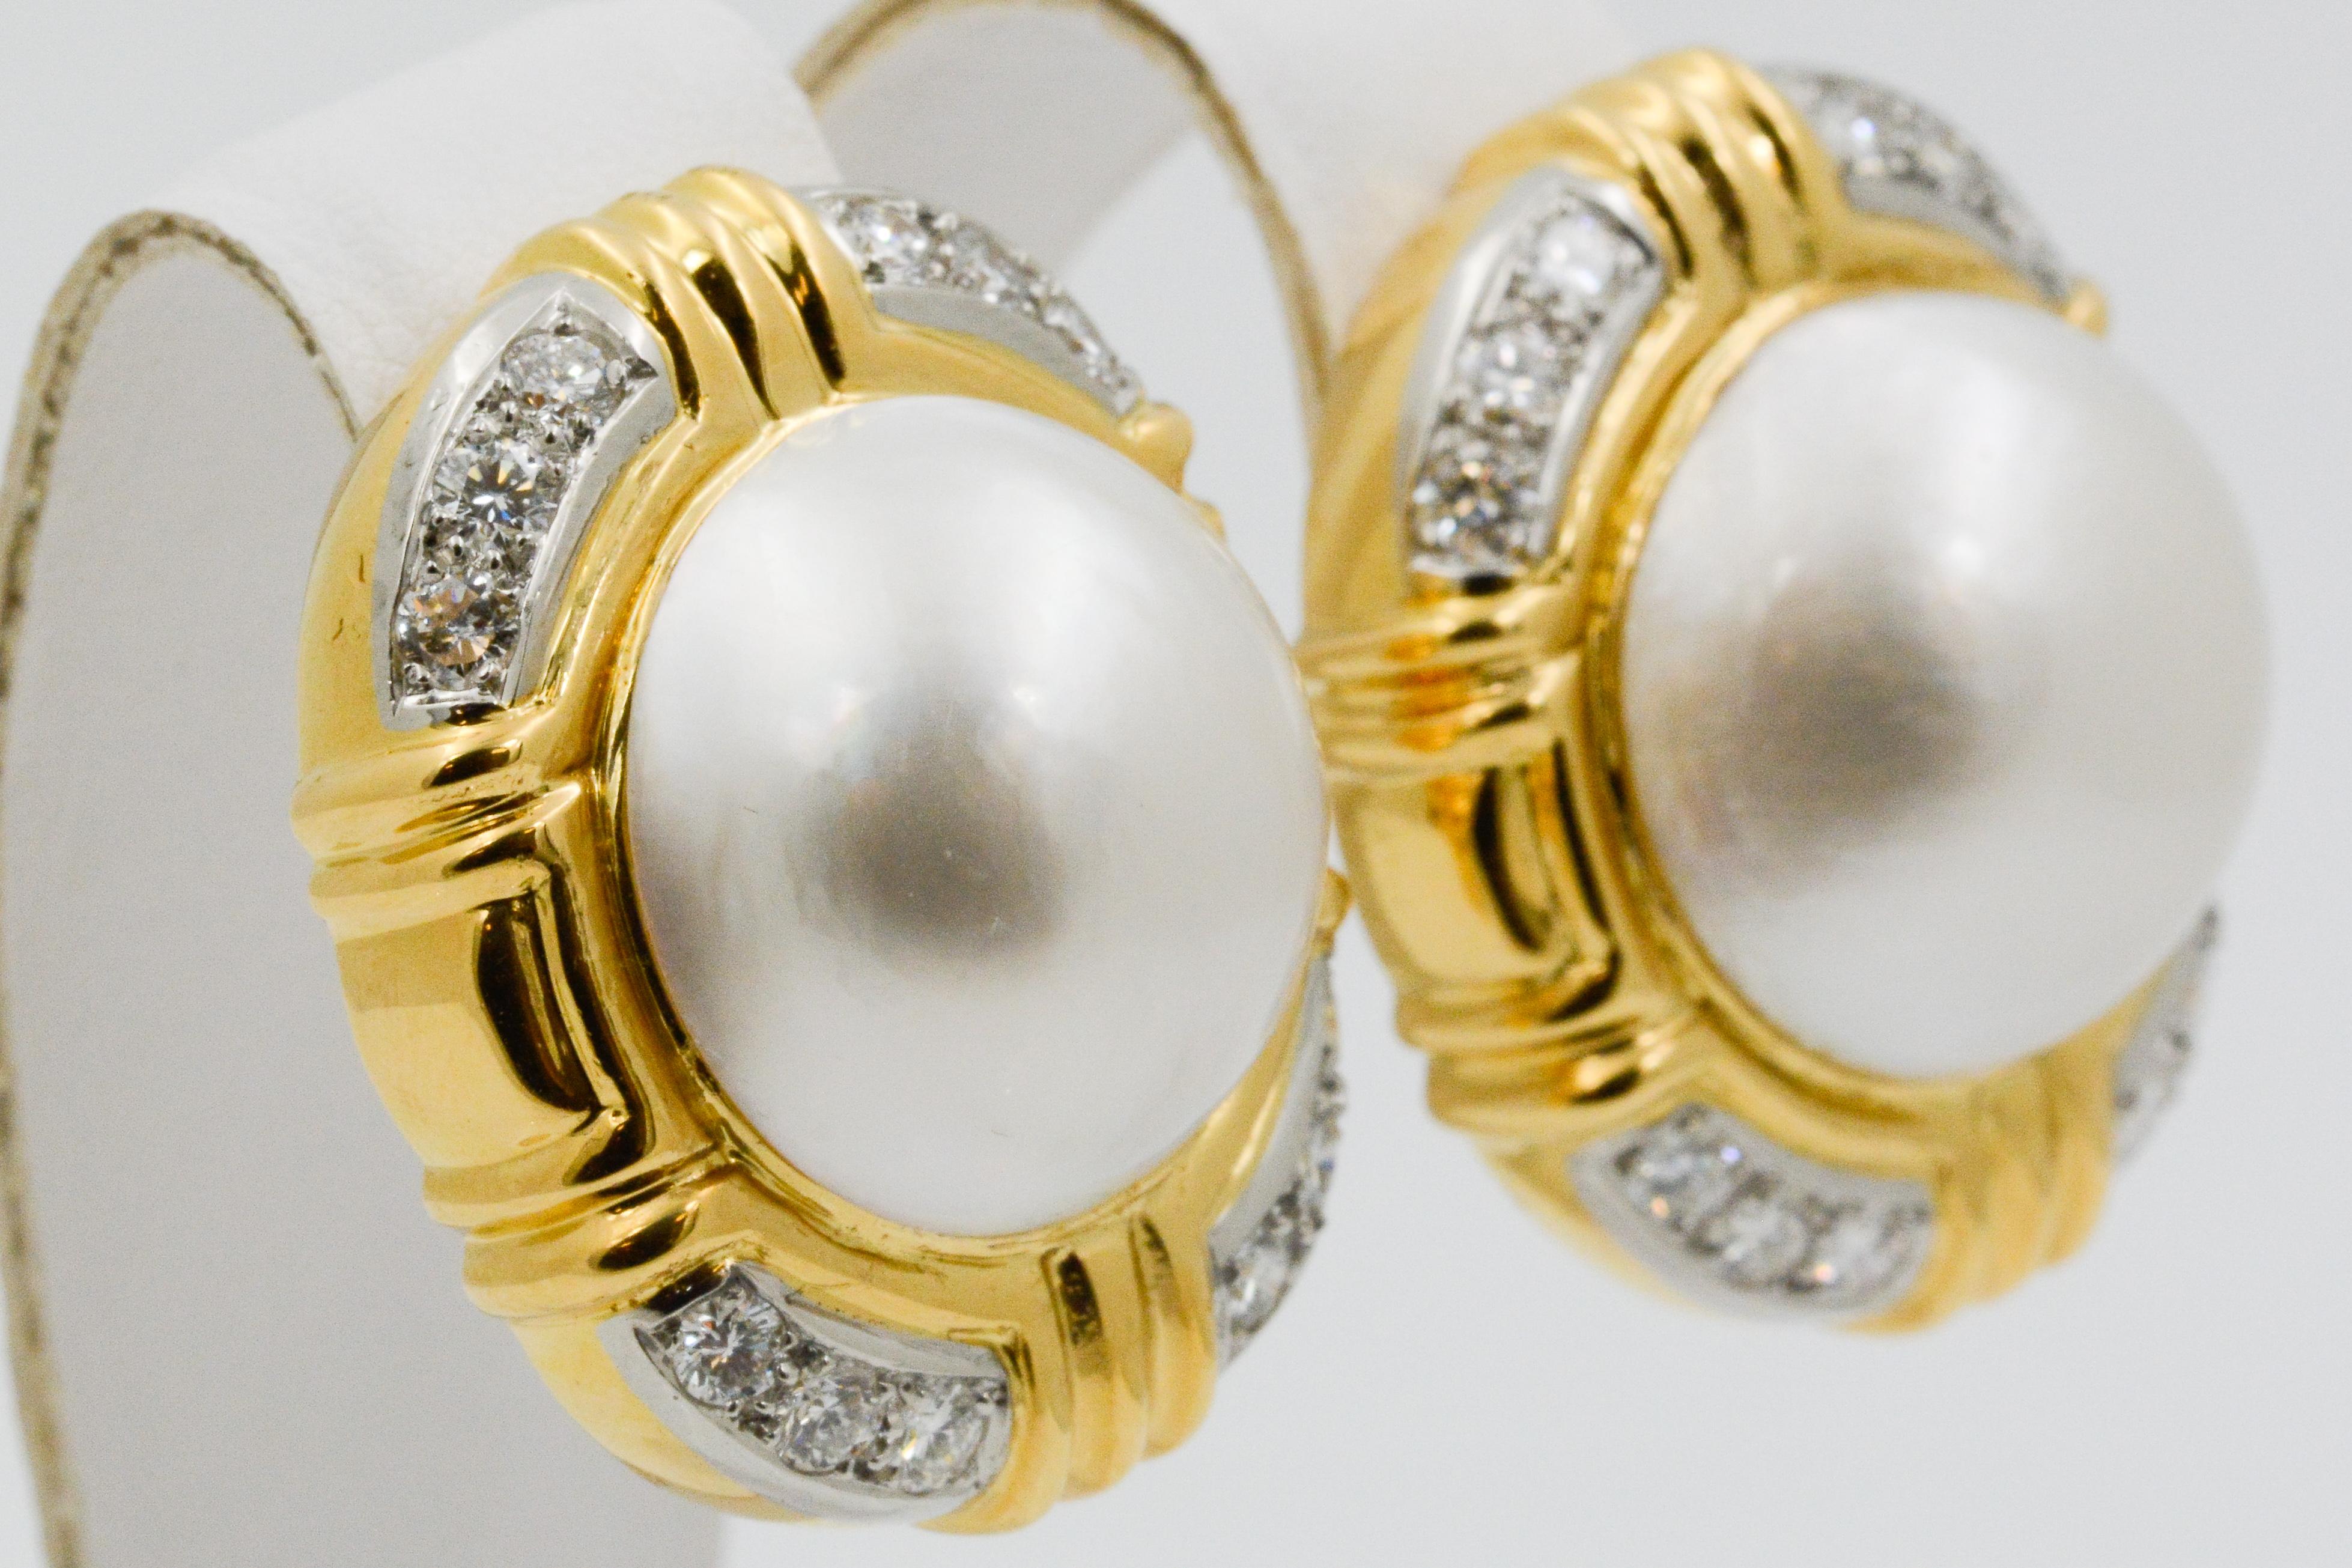 These large 18k yellow gold clip earrings feature two mabe pearls that measure 18.27mm in diameter and are accented with round diamonds that weigh a total of .75 carats. 